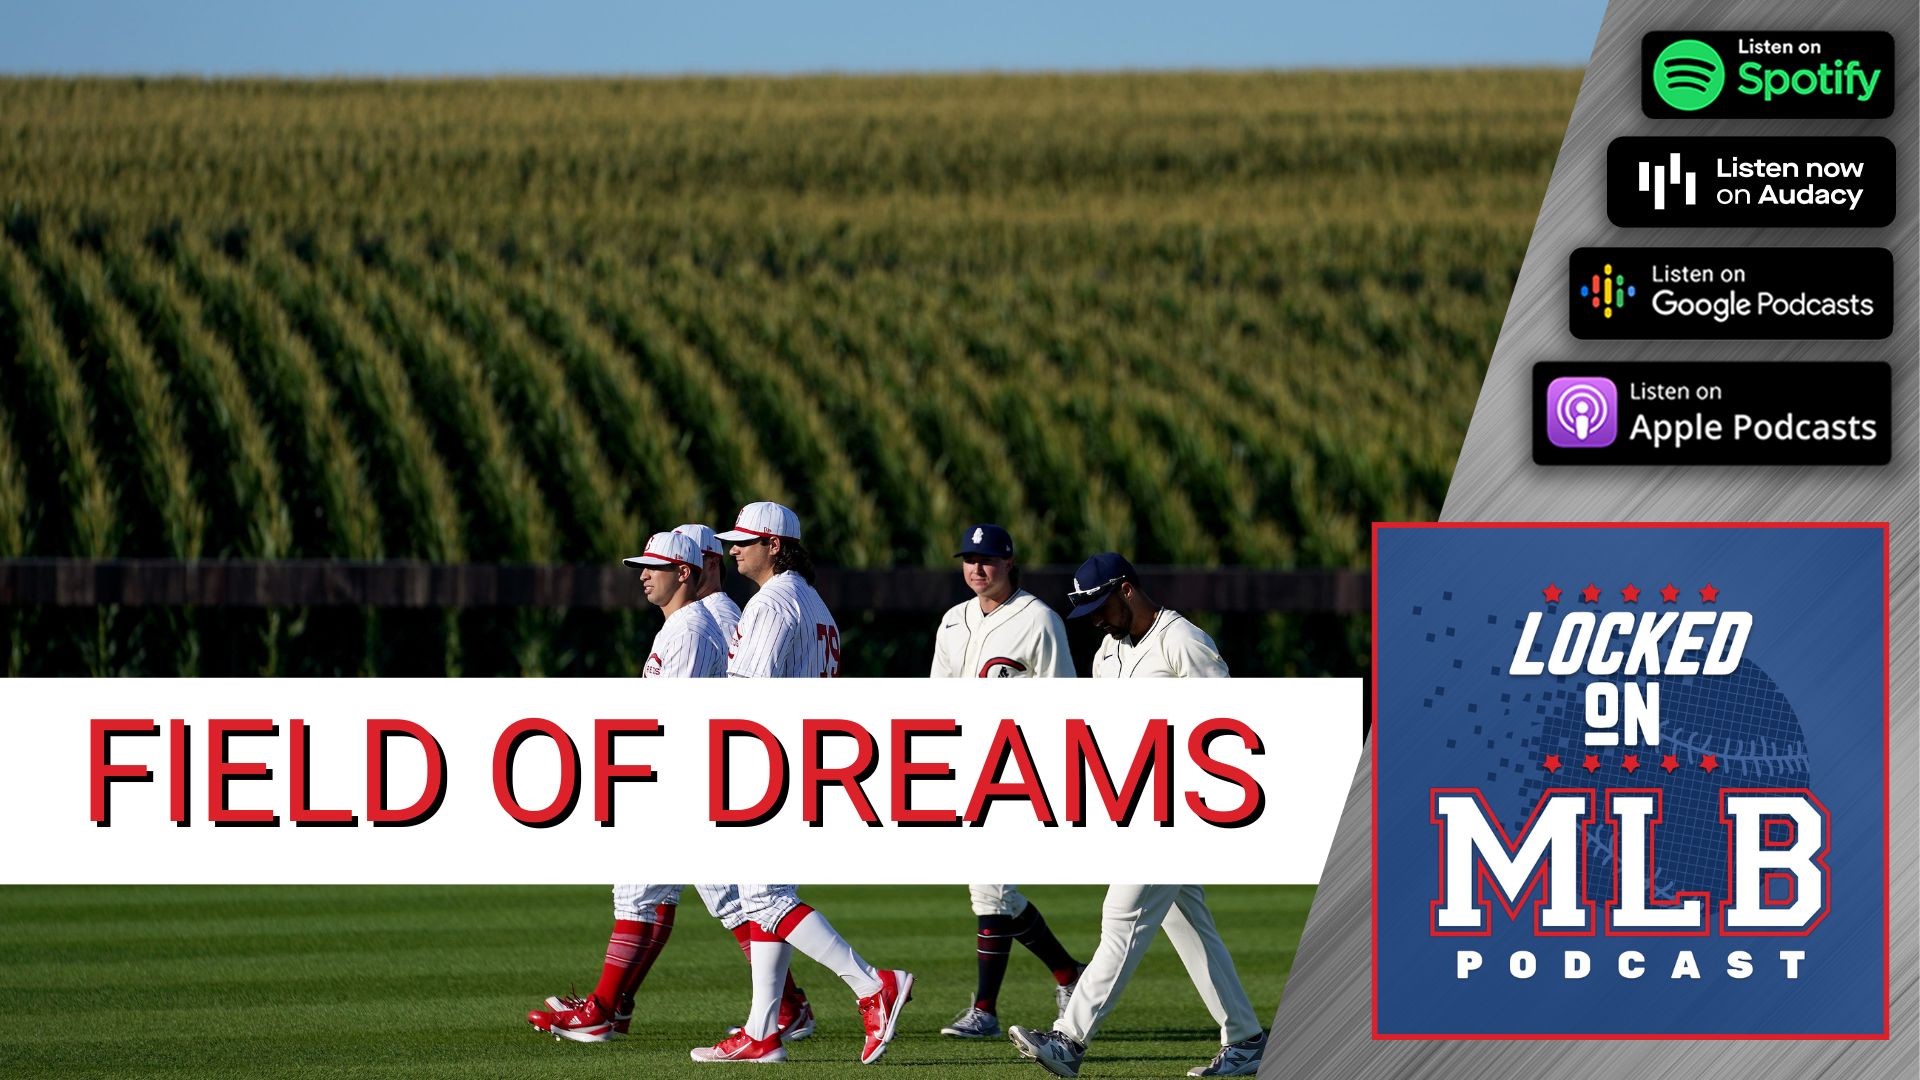 MLB returned to the Iowa cornfield to try and replicate the magic of last year's Field of Dreams game. It was fine but not as fresh as the 2021 classic.